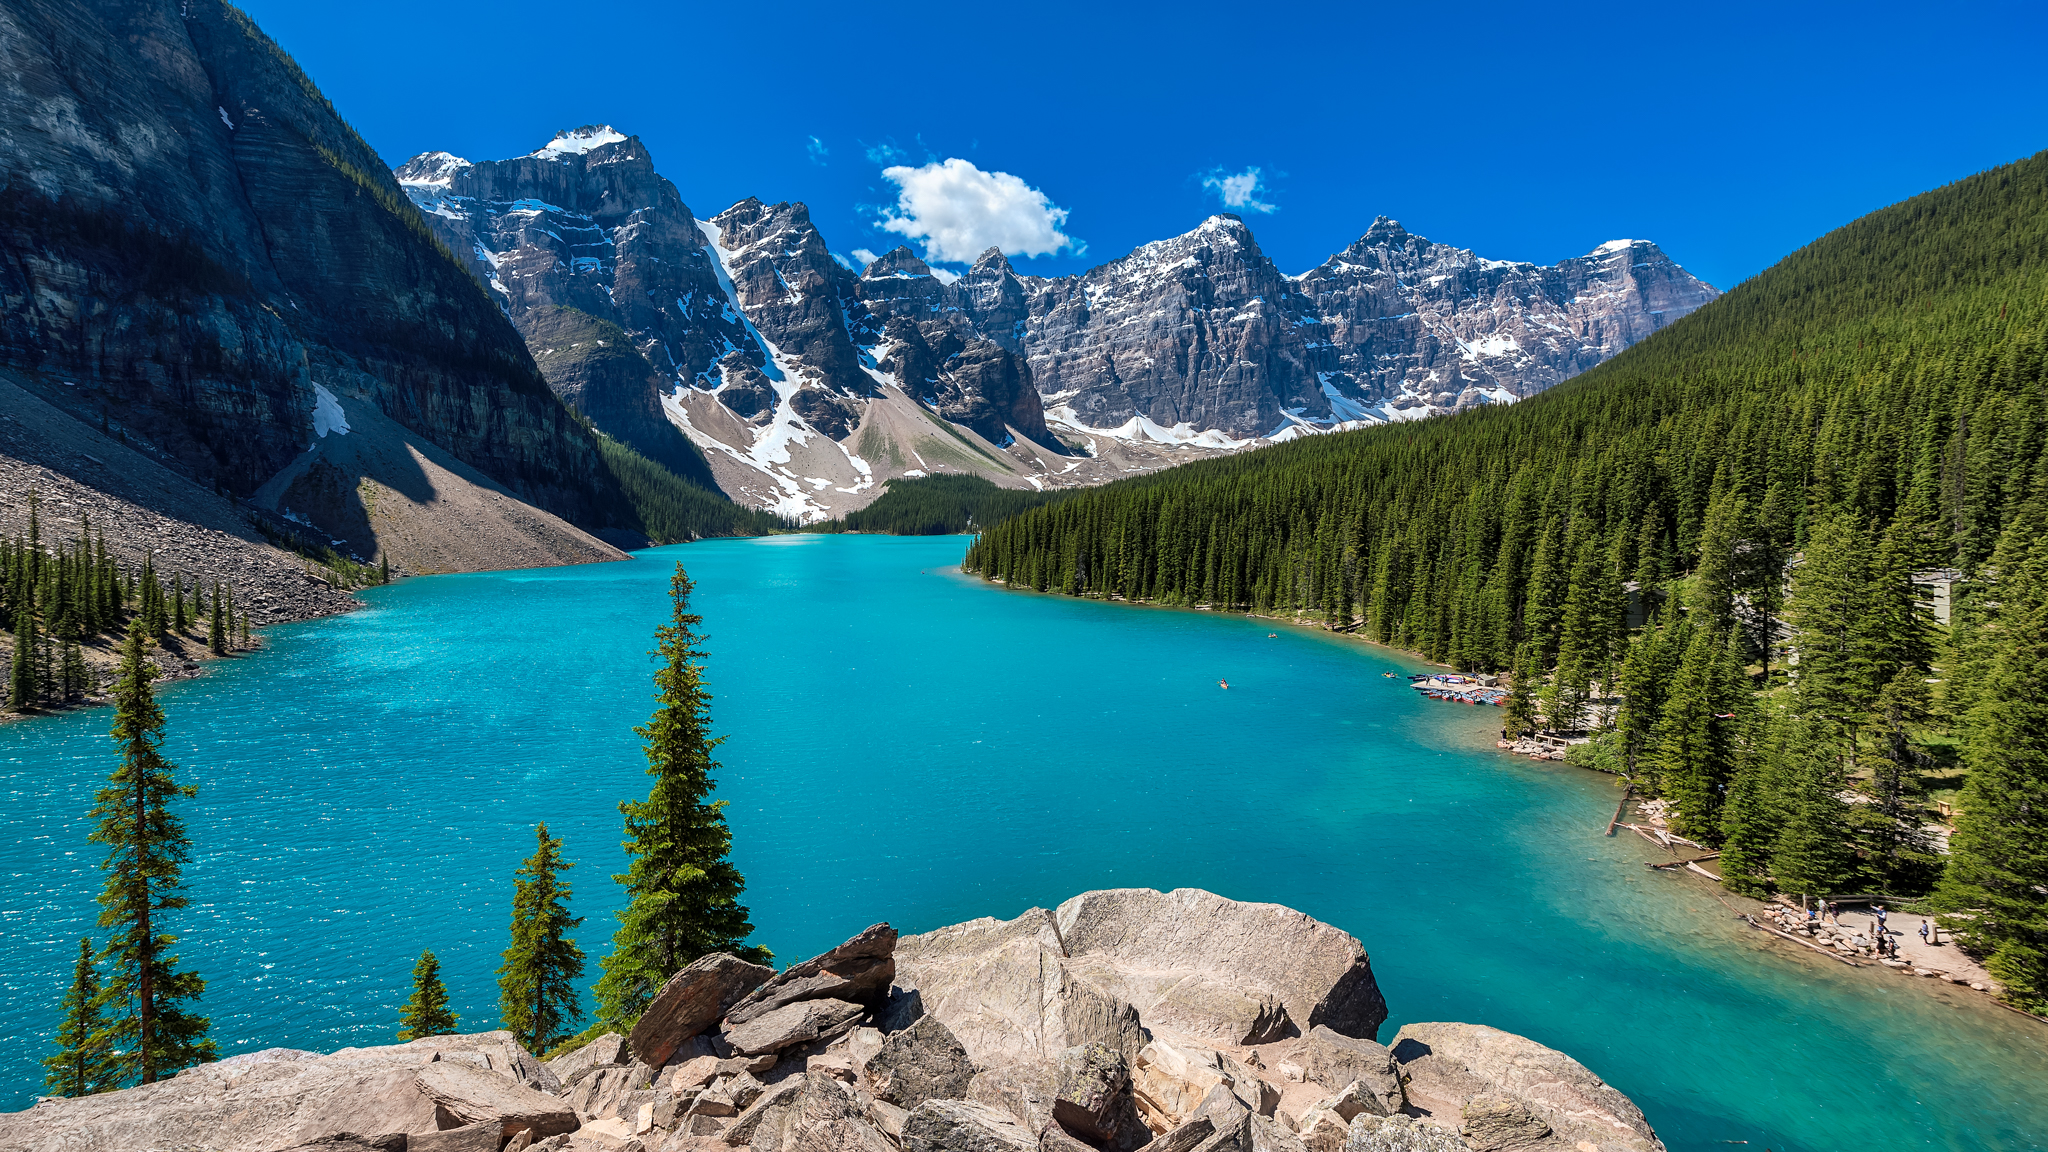 Moraine lake with mountain views in Banff National Park